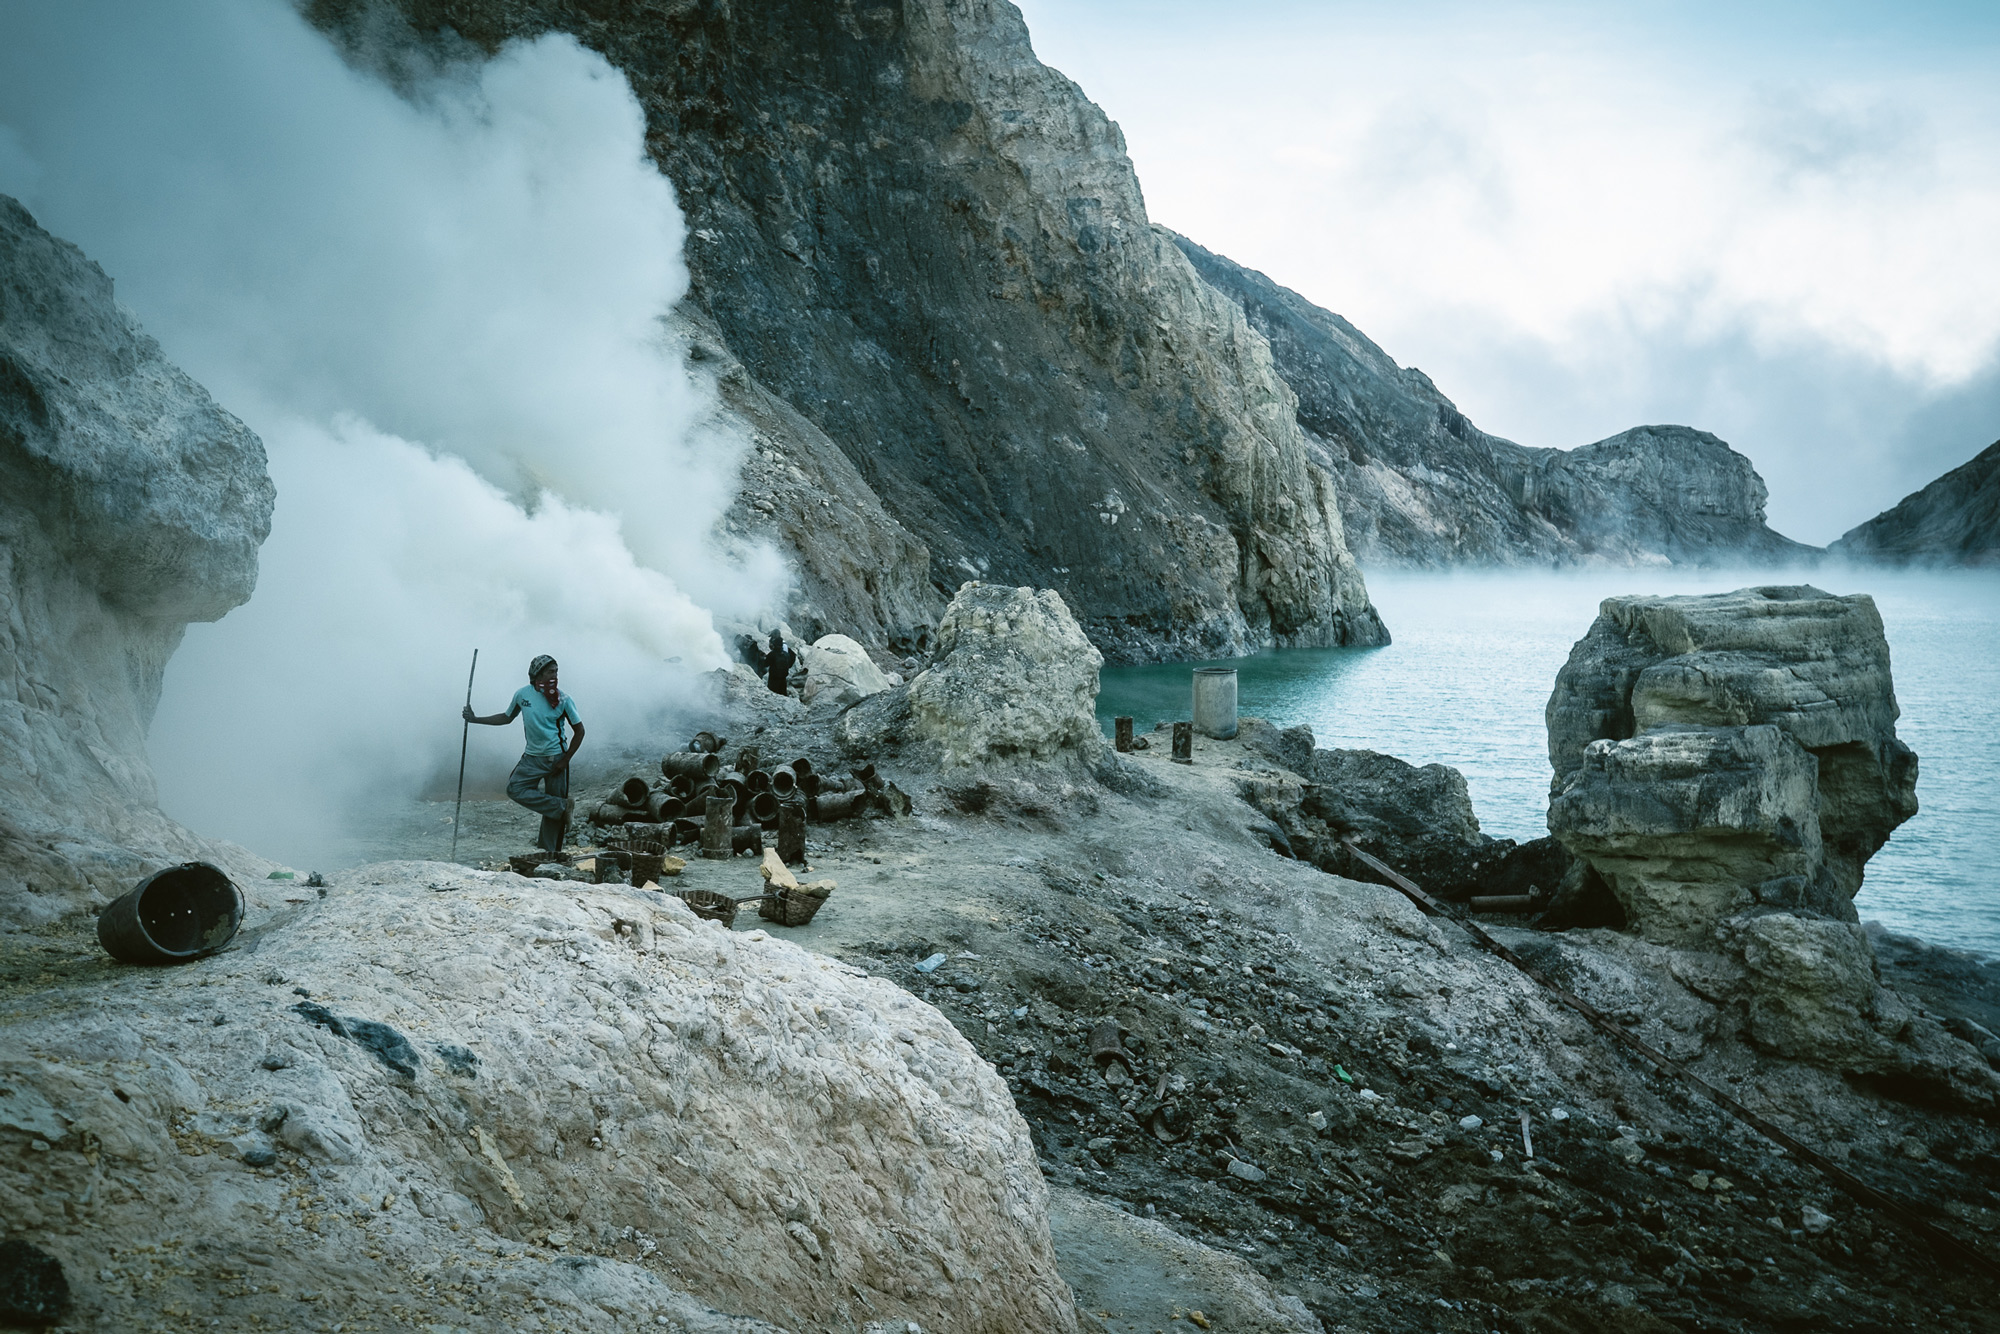 The miners are exposed to deadly gasses bellowing out from the active volcano and toxic lake. They are often enveloped by thick plumes of noxious smoke that trap them, leaving them choking for breath until the wind clears the poisonous cloud.